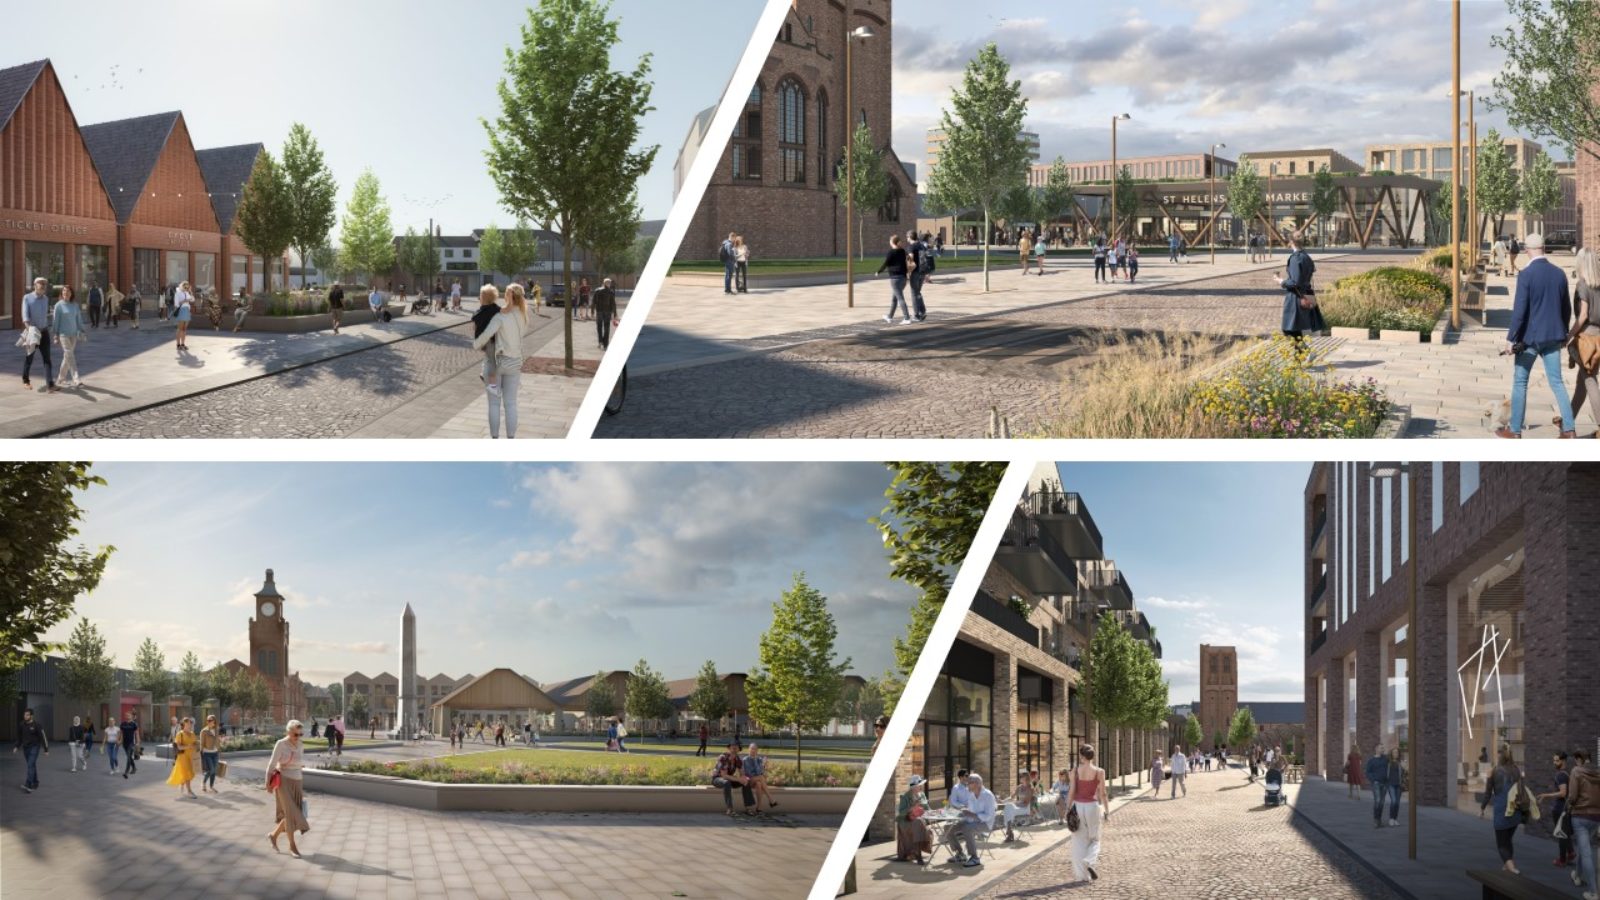 Transformational plans for St Helens and Earlestown have been unveiled